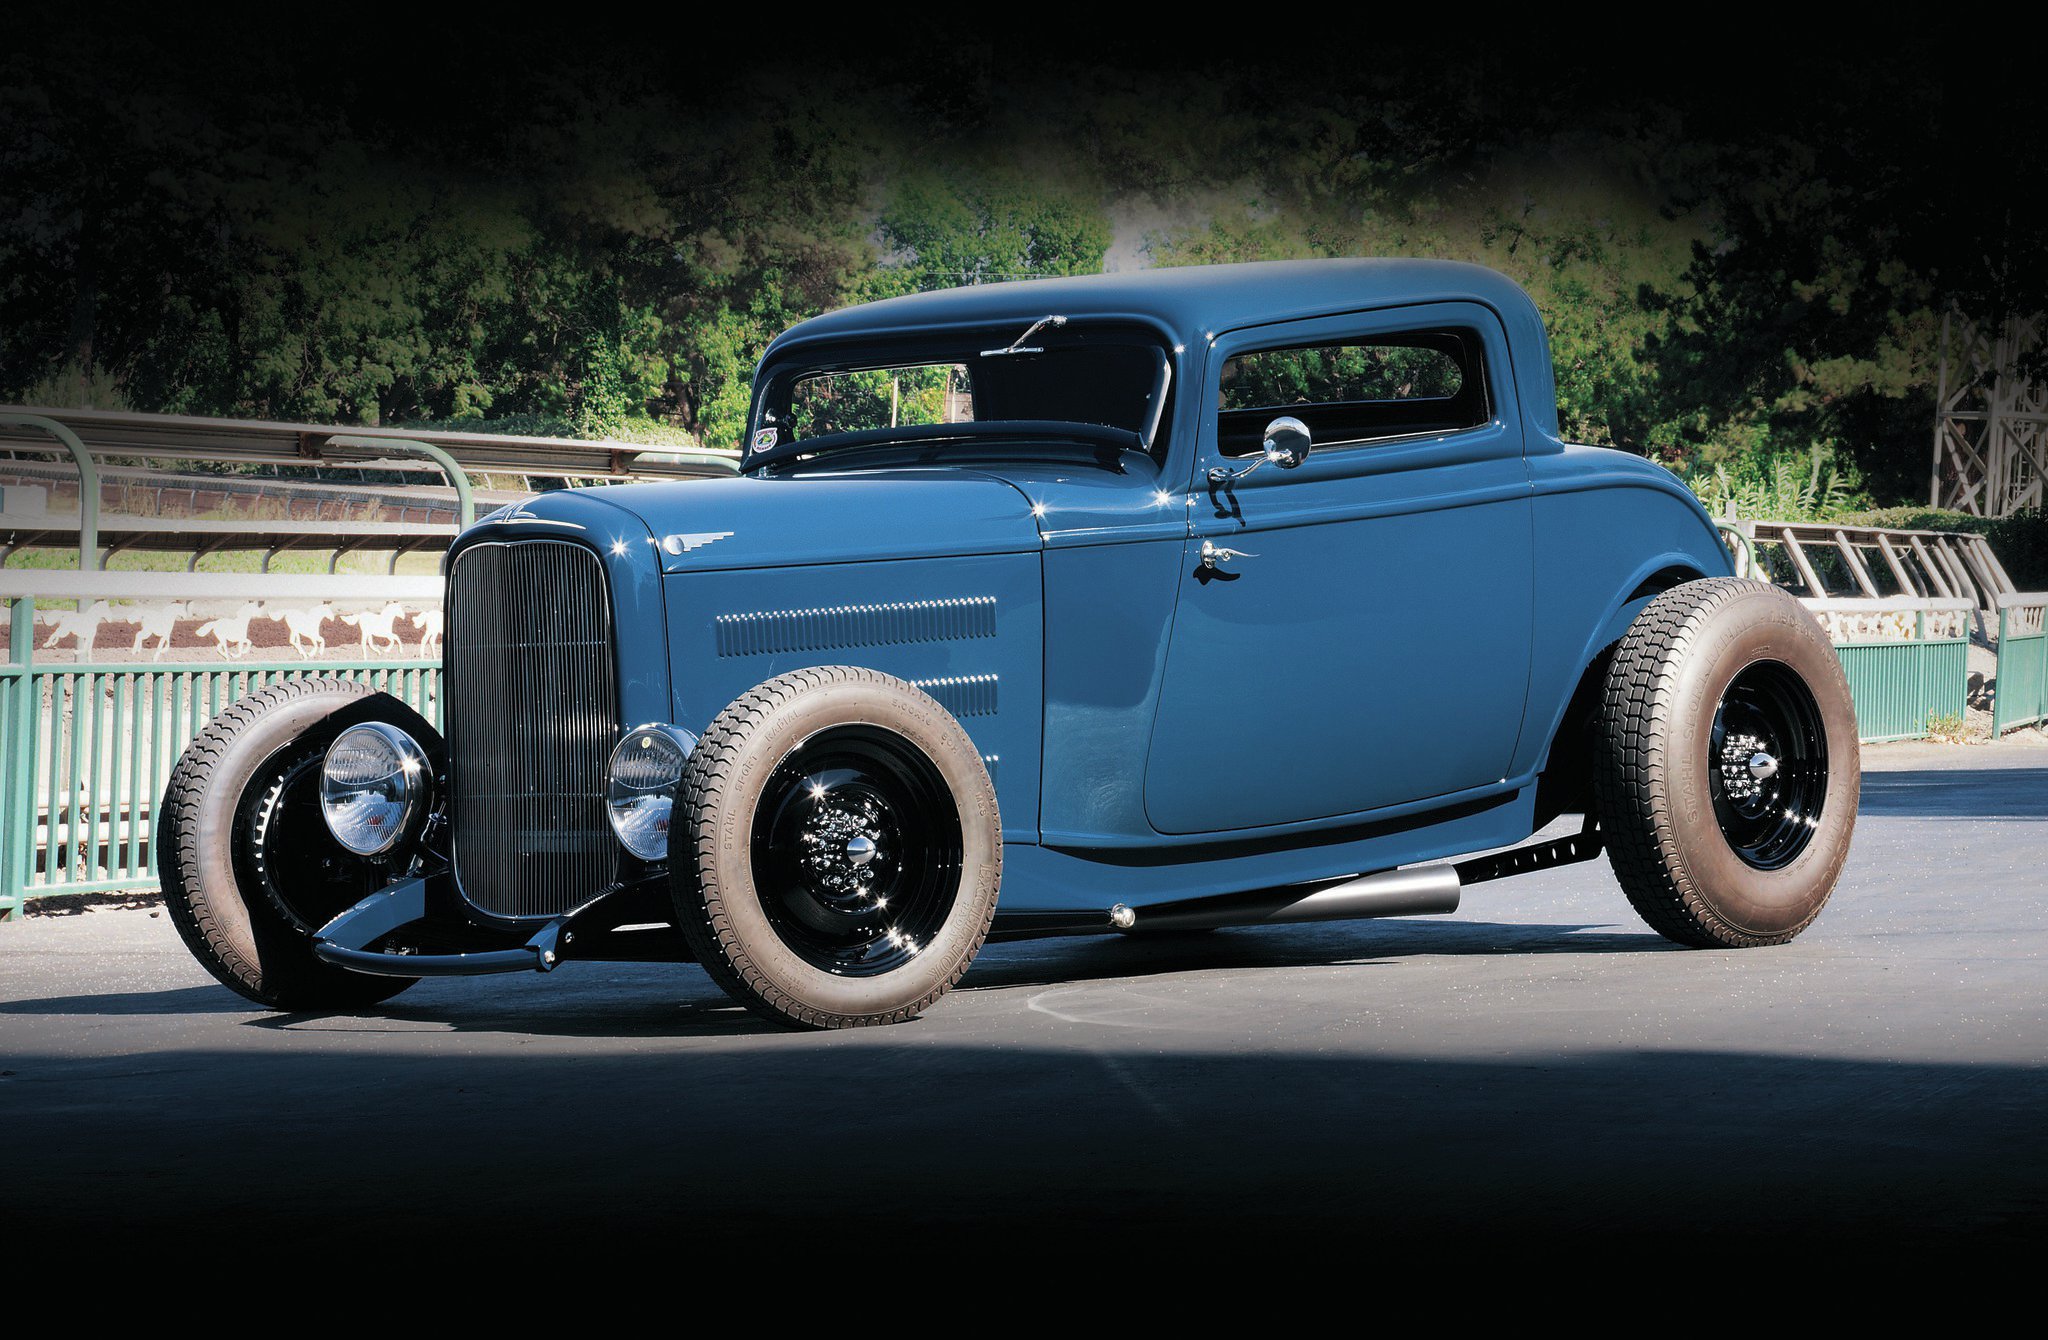 High Resolution Wallpaper | 1932 Ford Coupe 2048x1340 px